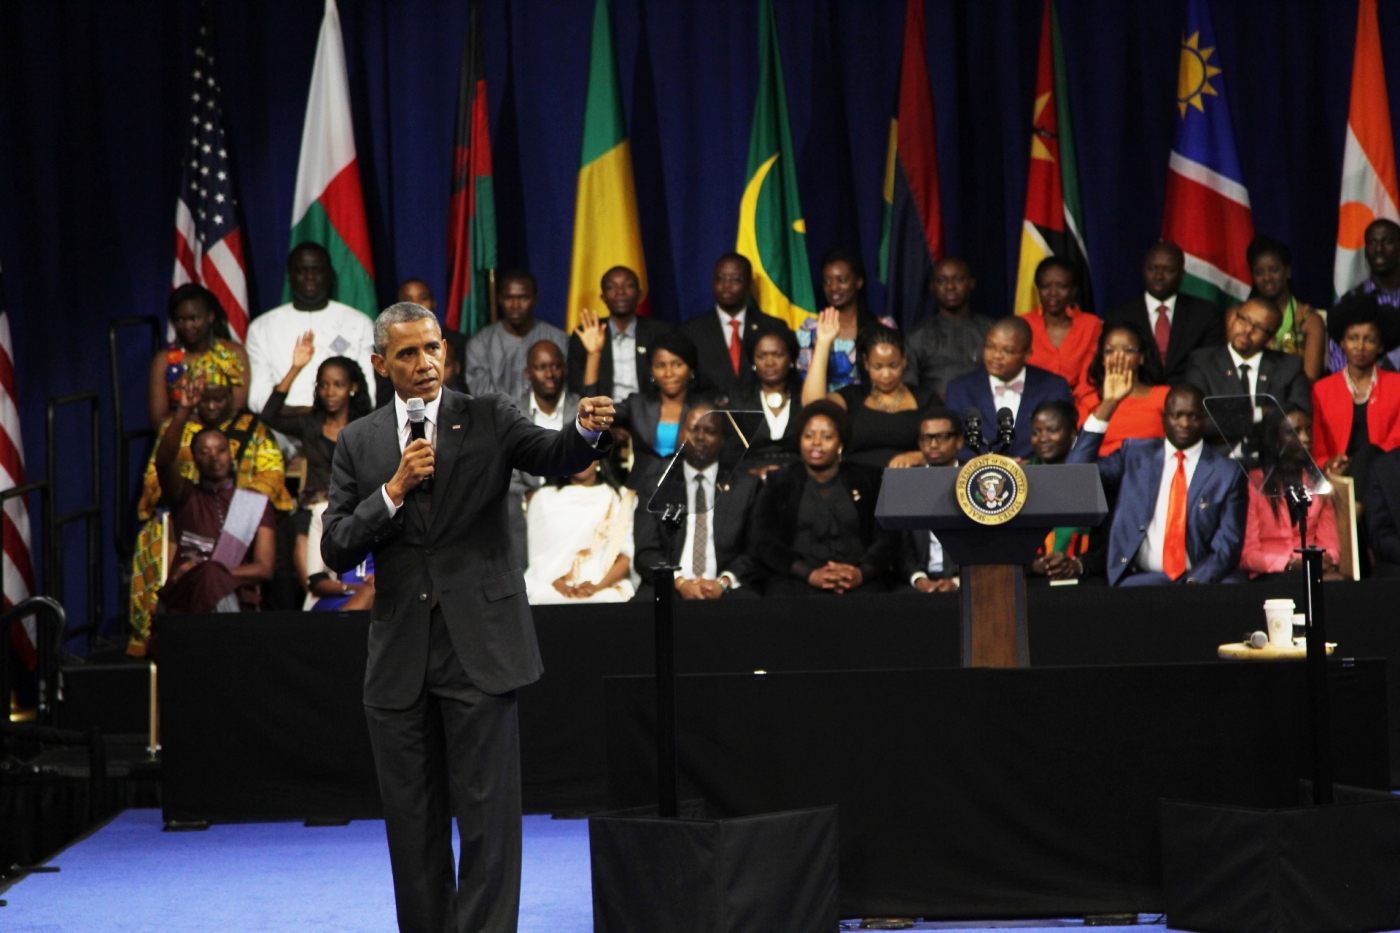 Remarks by President Obama at the Washington Fellowship for Young African Leaders Presidential Summit